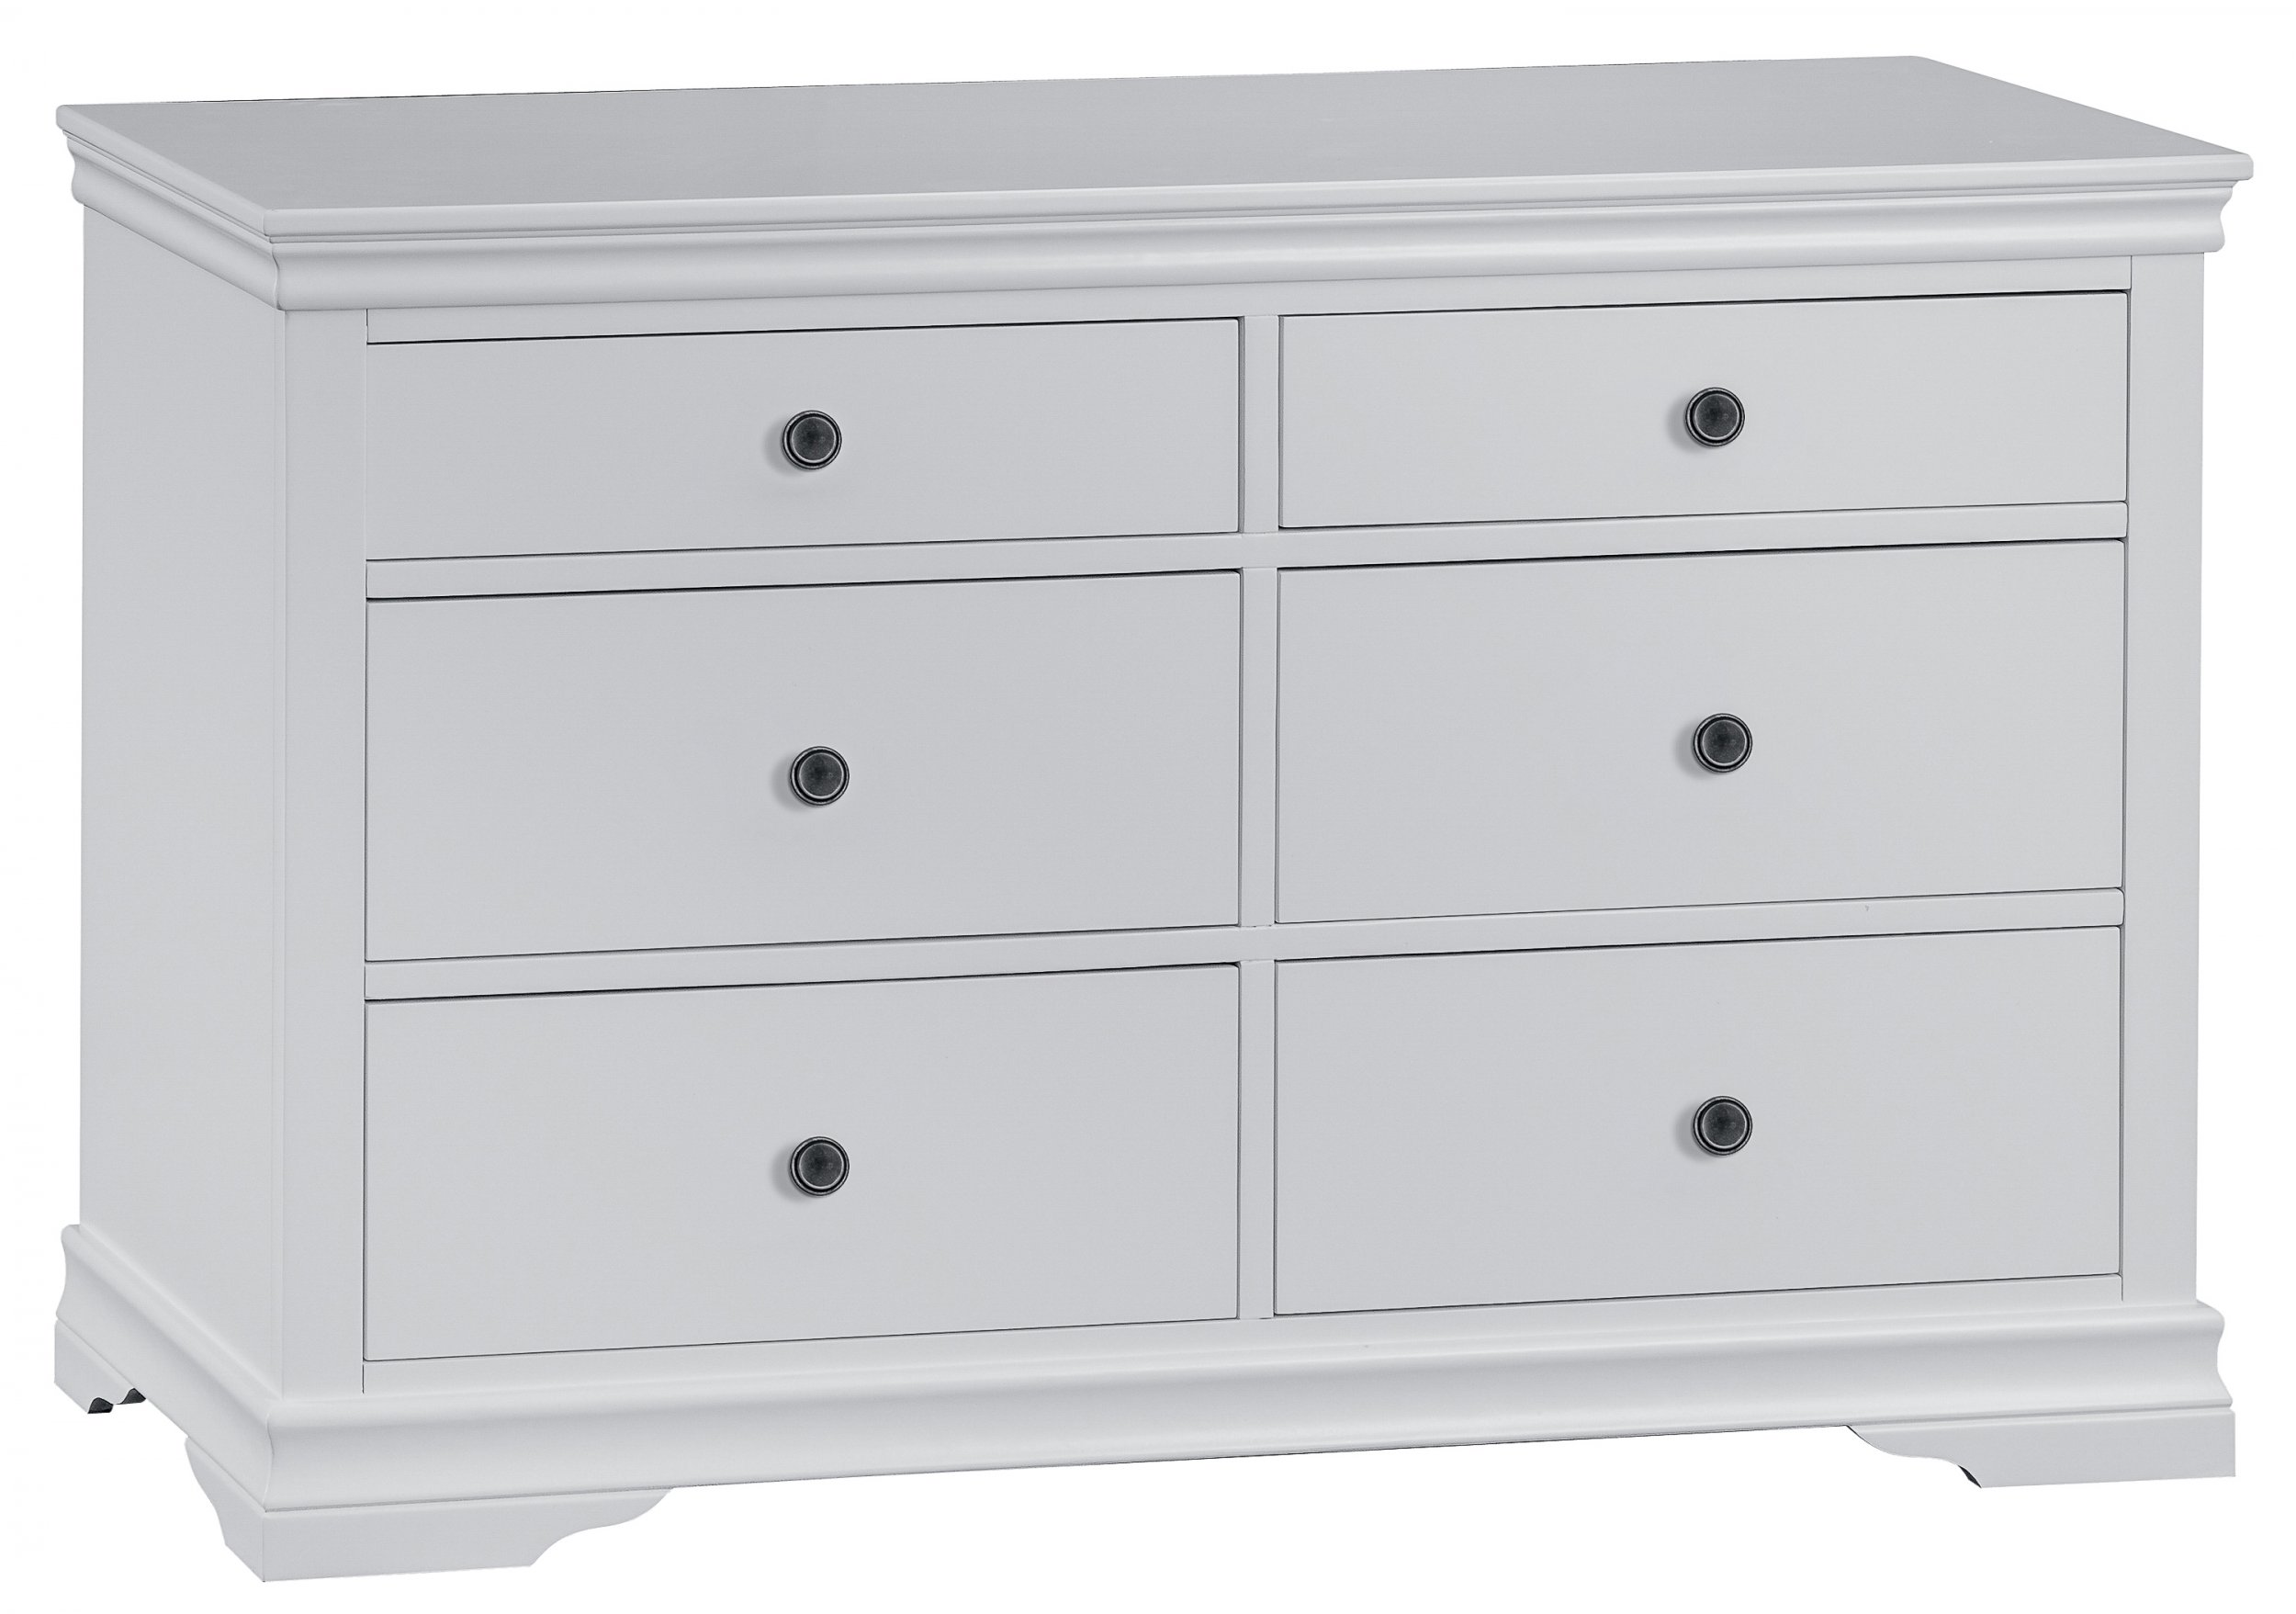 Swanley Grey Bedroom 6 Drawer Chest The Clearance Zone